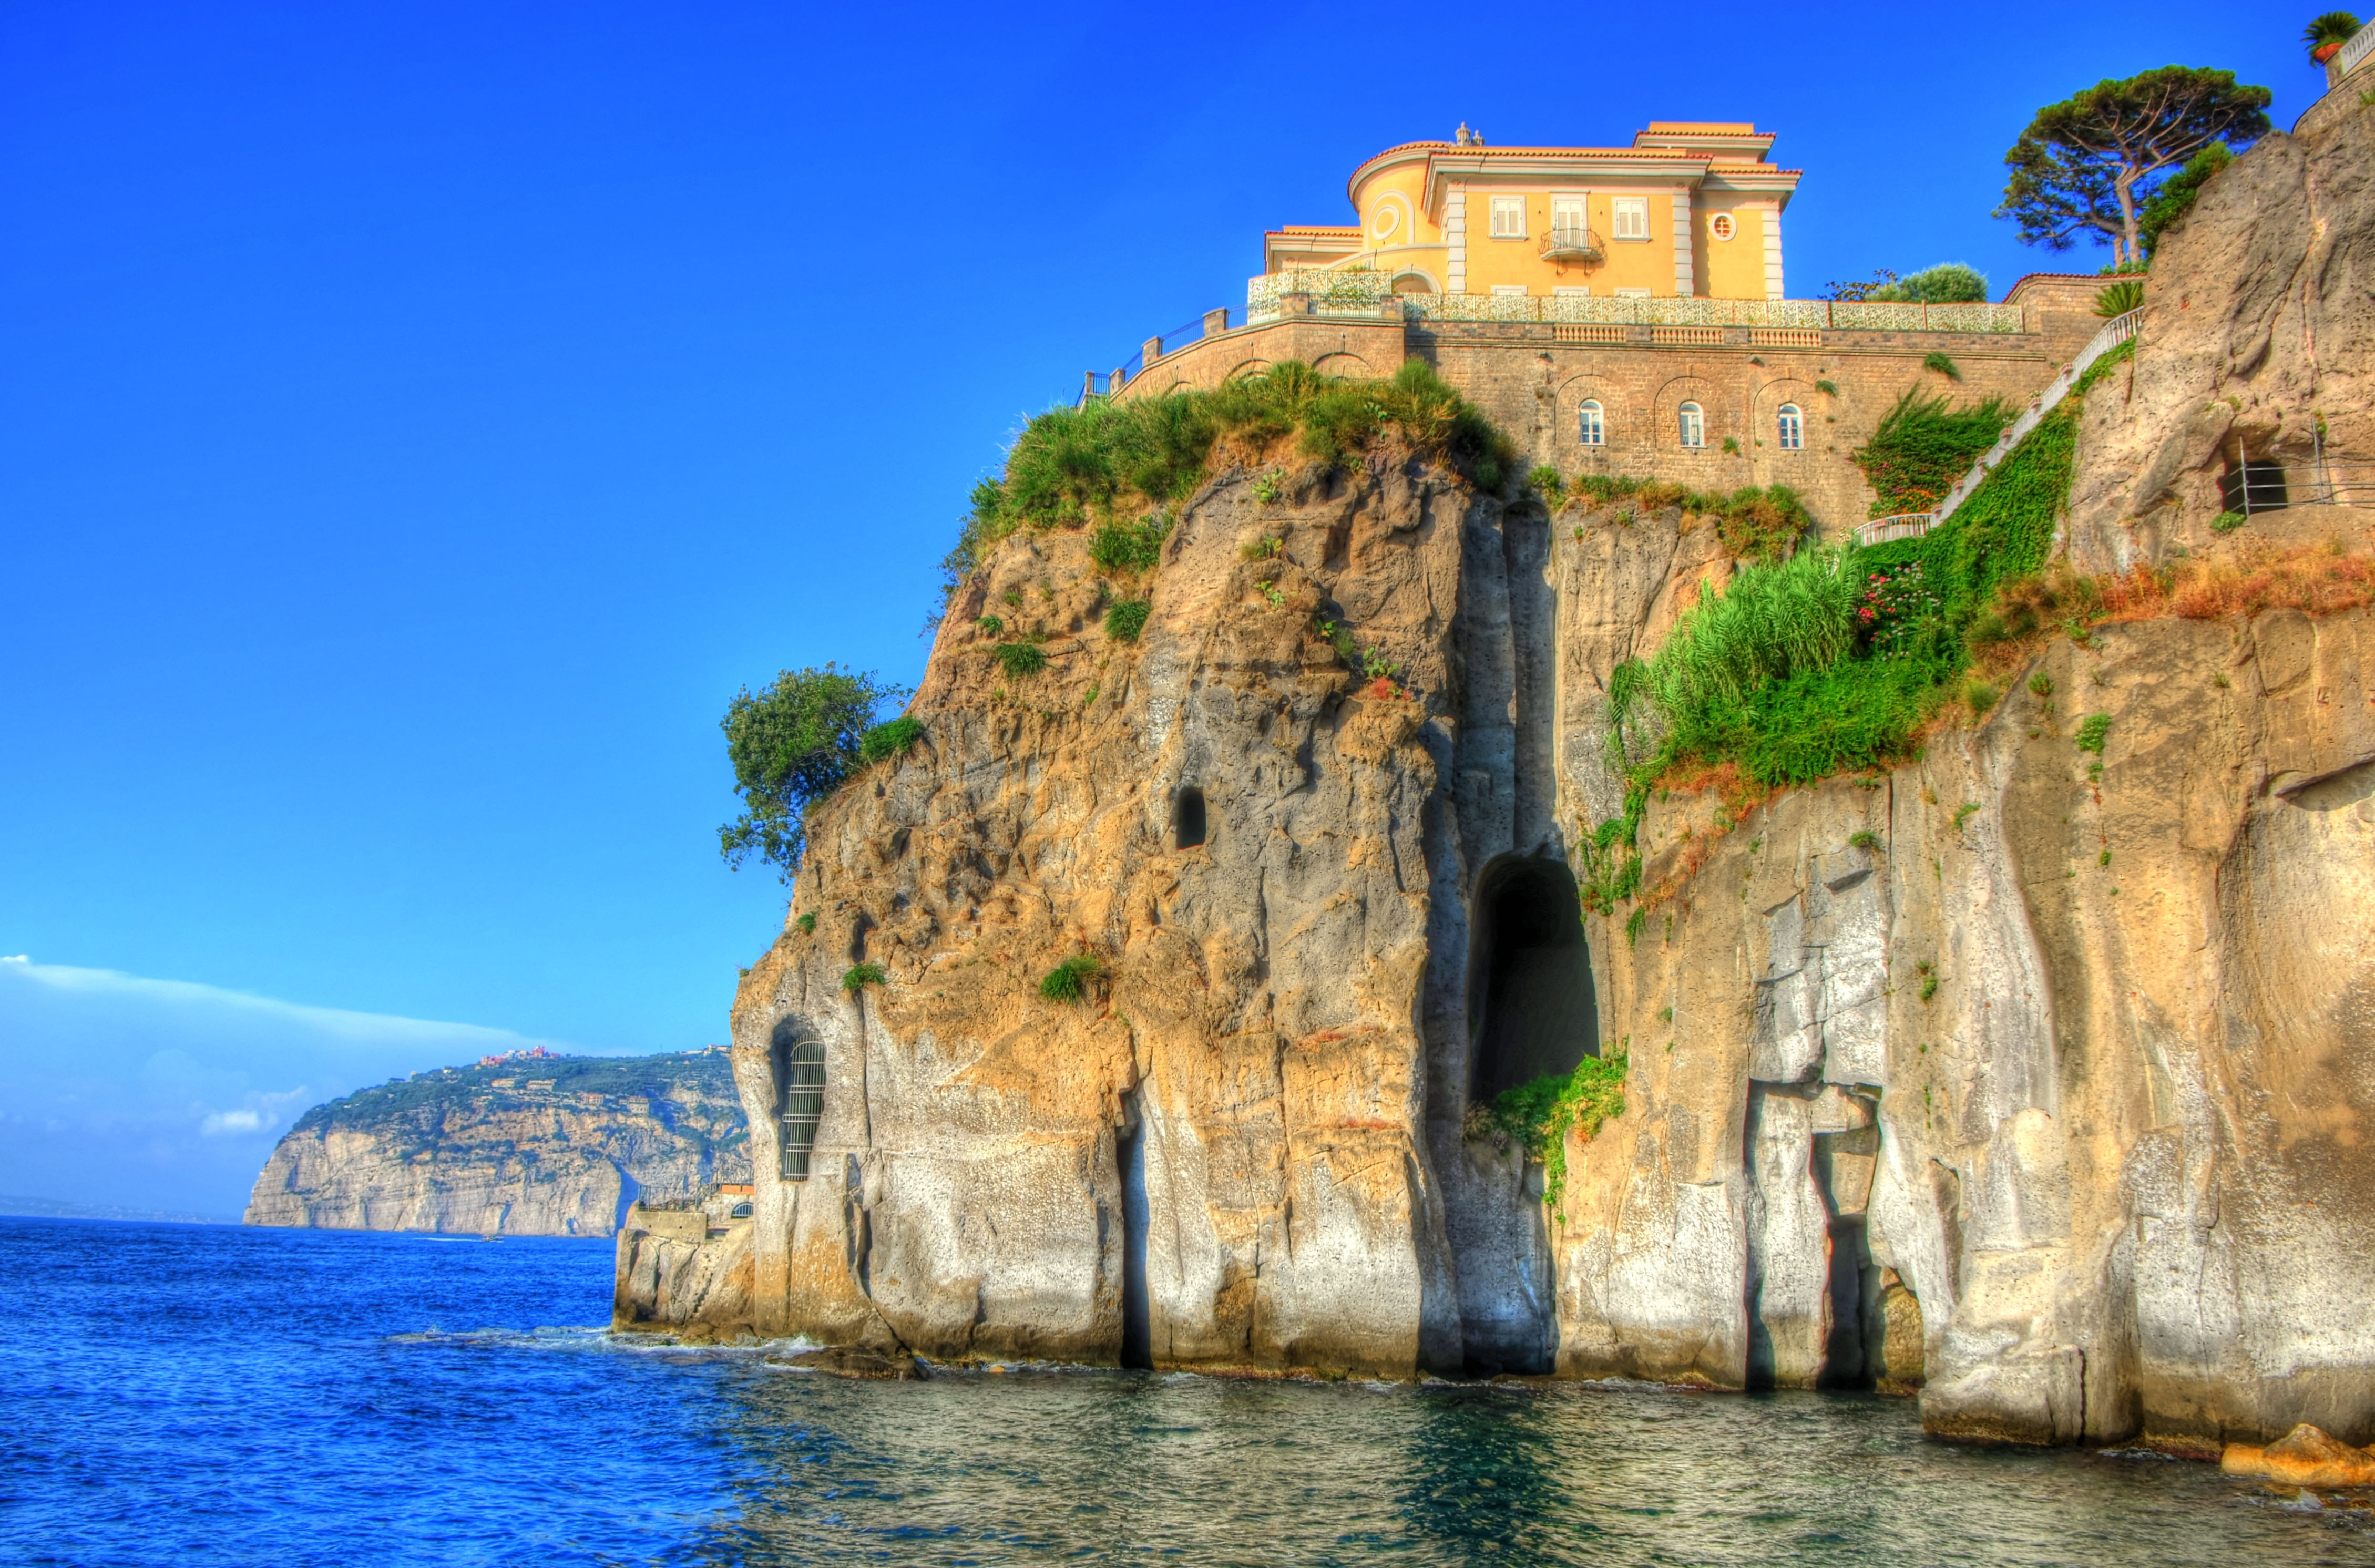 Wallpapers MANSION ON A CLIFF SORRENTO ITALY landscapes on the desktop